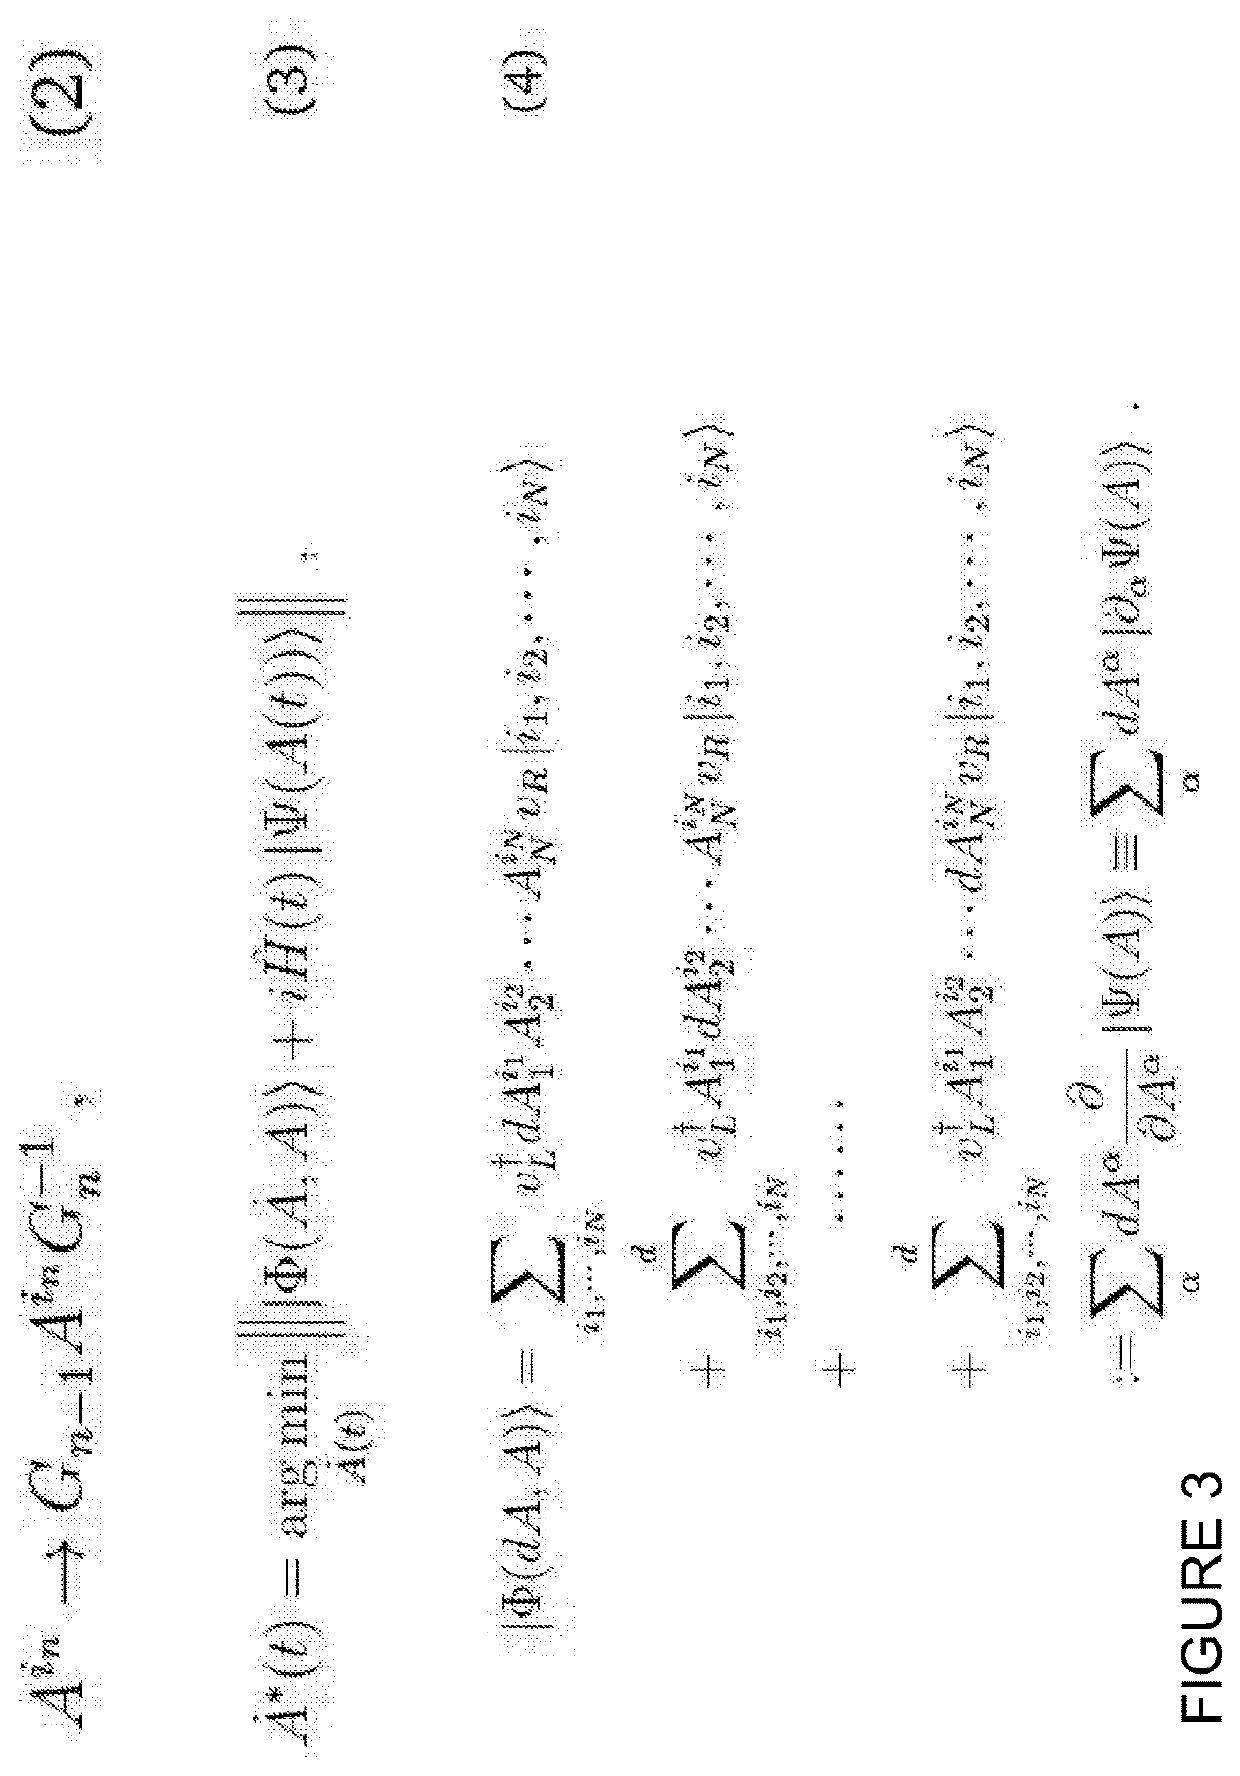 A quantum circuit based system configured to model physical or chemical systems